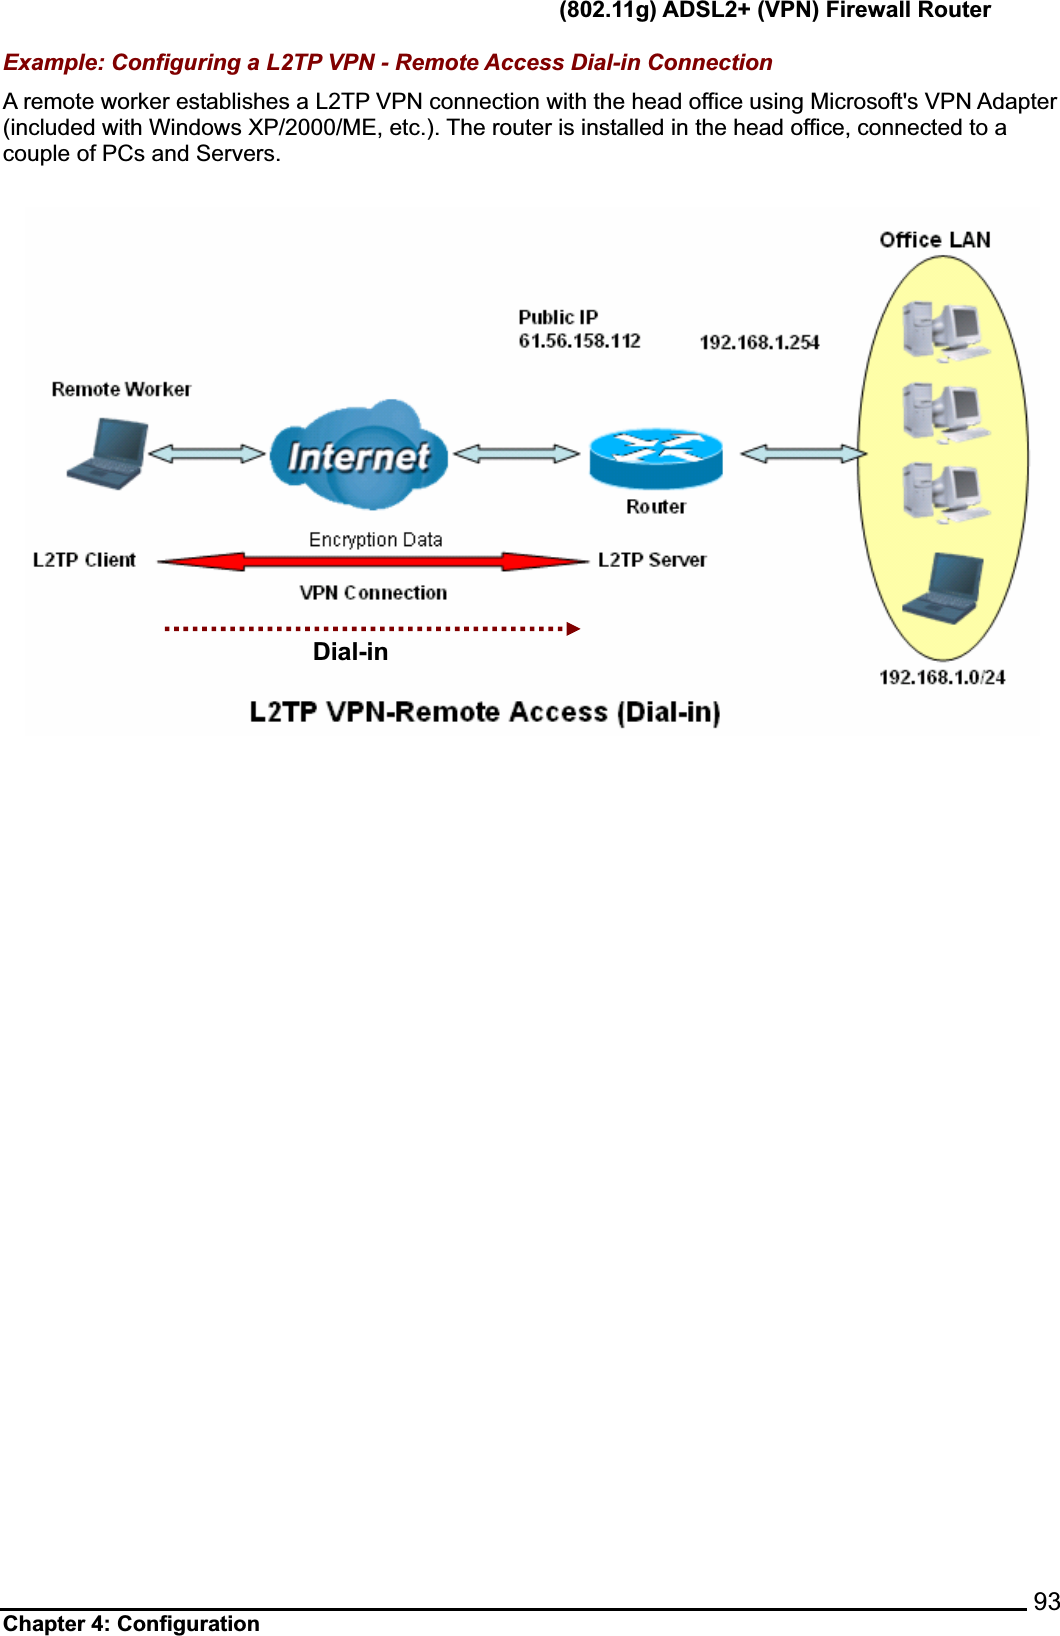      (802.11g) ADSL2+ (VPN) Firewall Router Chapter 4: Configuration    93Example: Configuring a L2TP VPN - Remote Access Dial-in Connection A remote worker establishes a L2TP VPN connection with the head office using Microsoft&apos;s VPN Adapter (included with Windows XP/2000/ME, etc.). The router is installed in the head office, connected to a couple of PCs and Servers.Dial-in